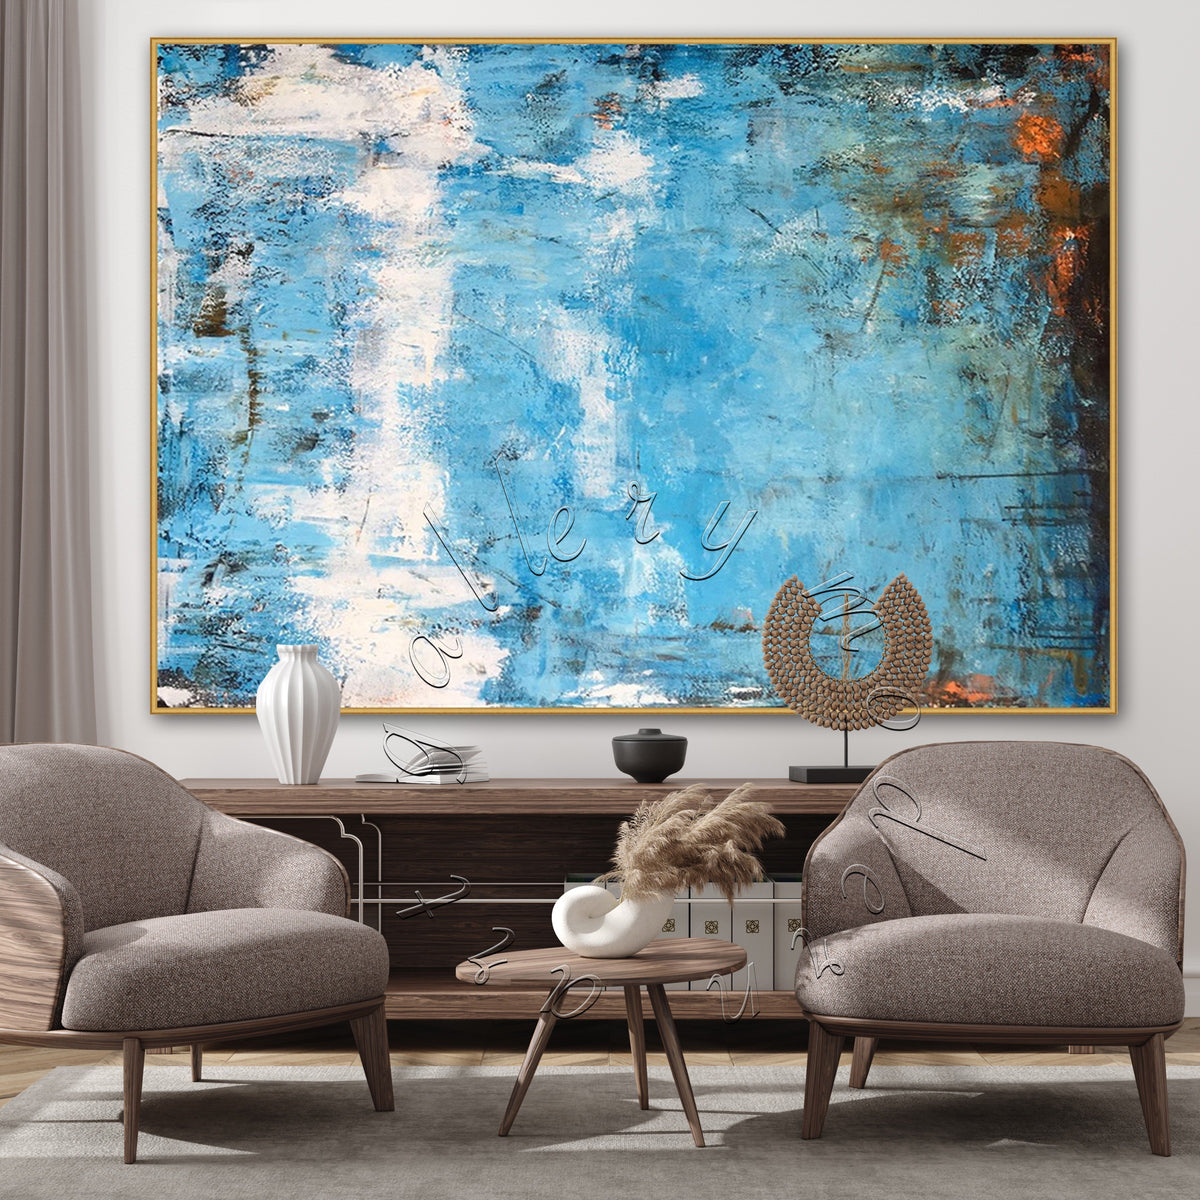 Blue Abstract Painting, Original Oil on Canvas Wall Art